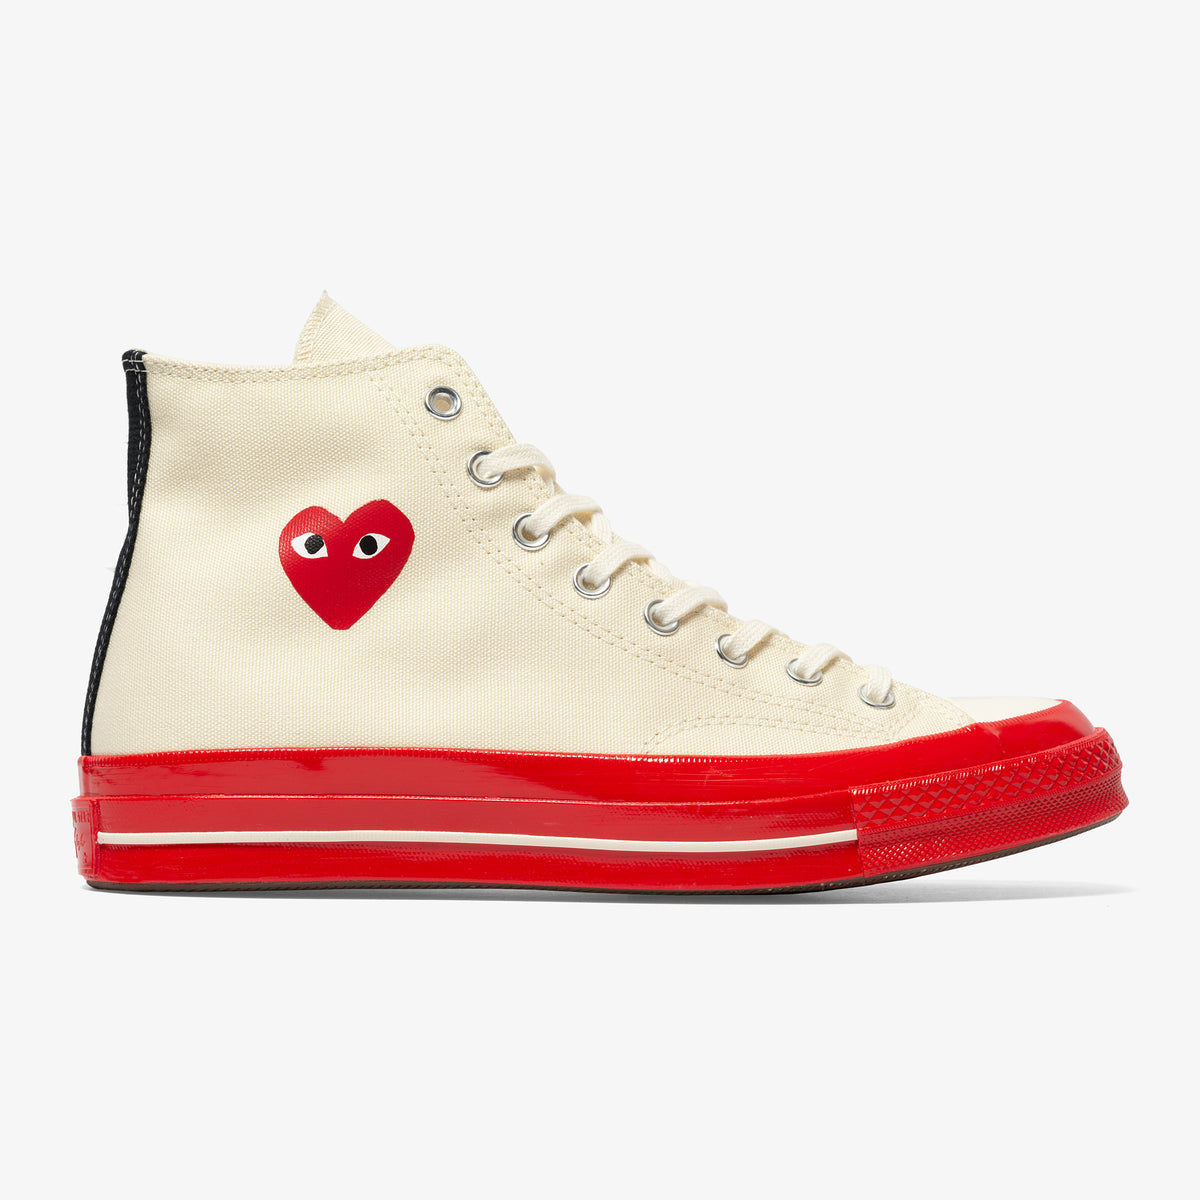 CT 70 CDG Play HI (White/Red Sole)